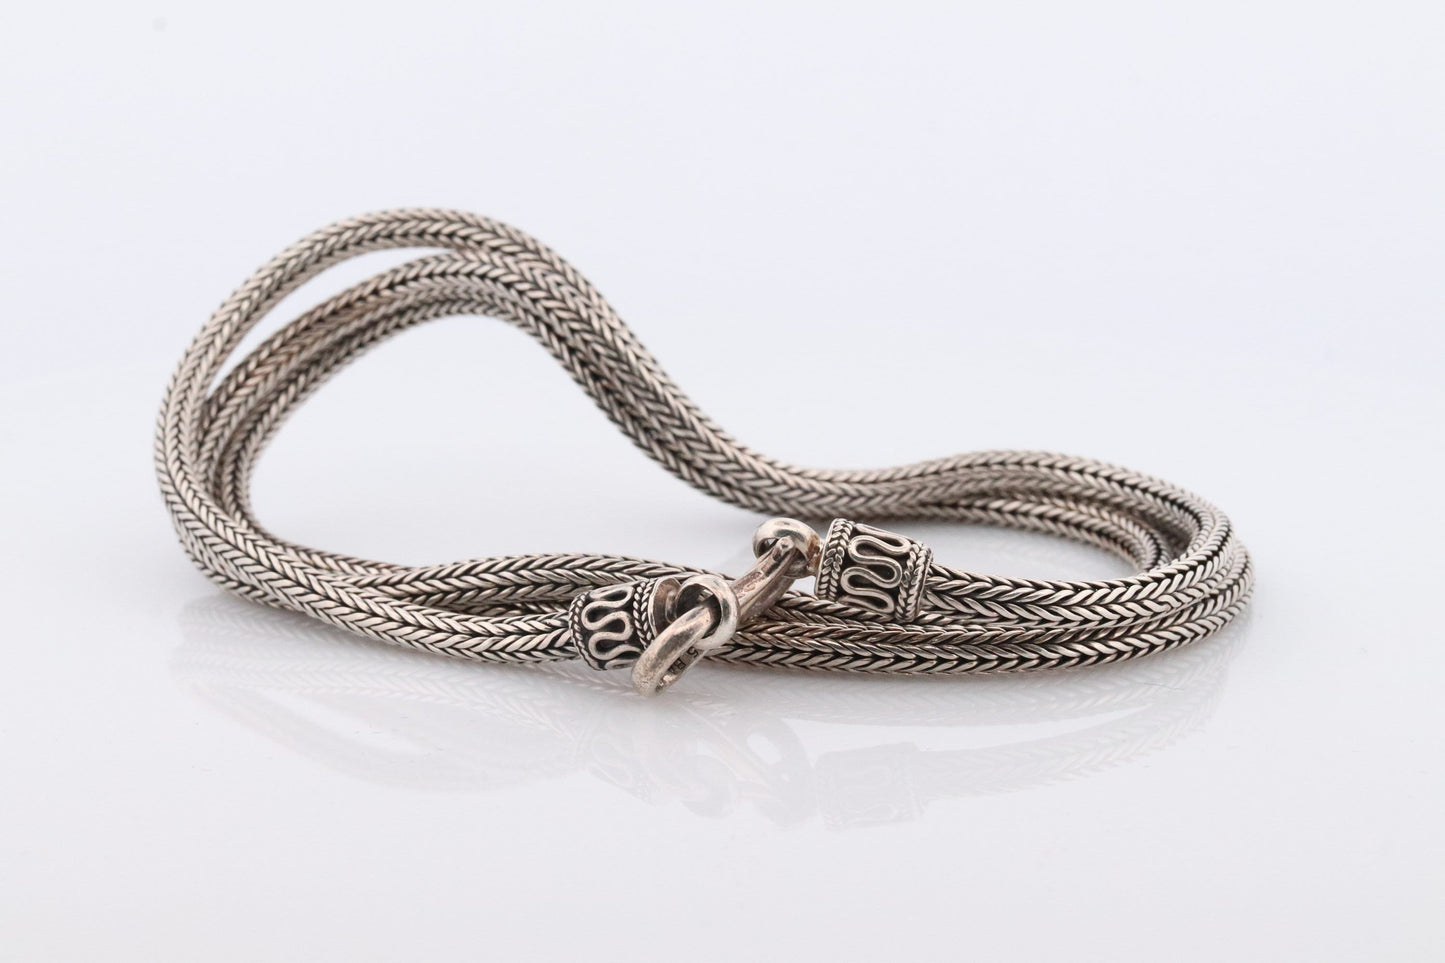 Byzantine Foxtail Weave Necklace. Heavy Sterling Silver 925 BA Wide Long Byzantine Round Woven 28in Rope Necklace.